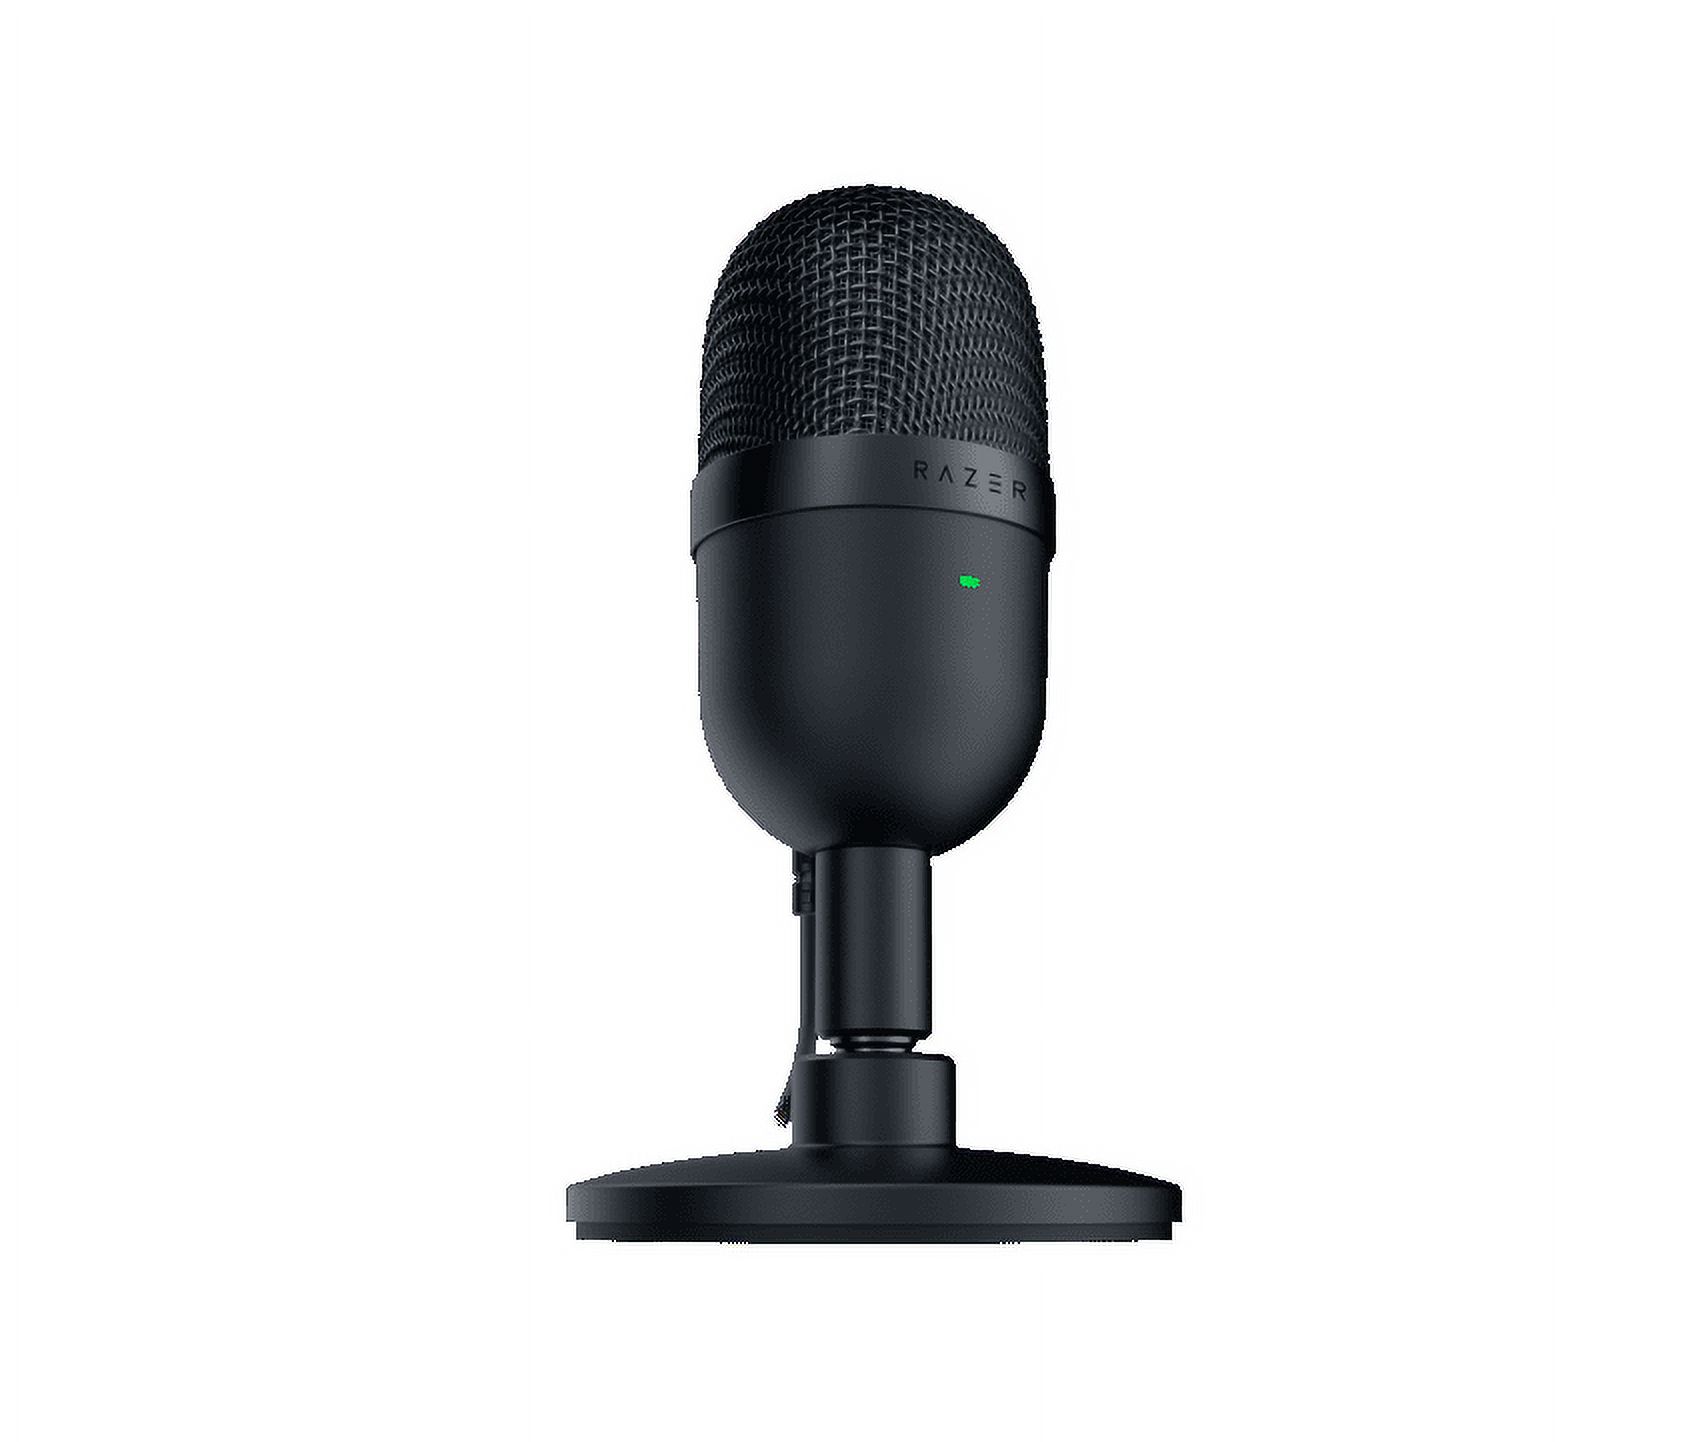 Razer Seiren Mini USB Ultra Compact Condenser Microphone for Streaming and Gaming on PC, Black - image 1 of 3